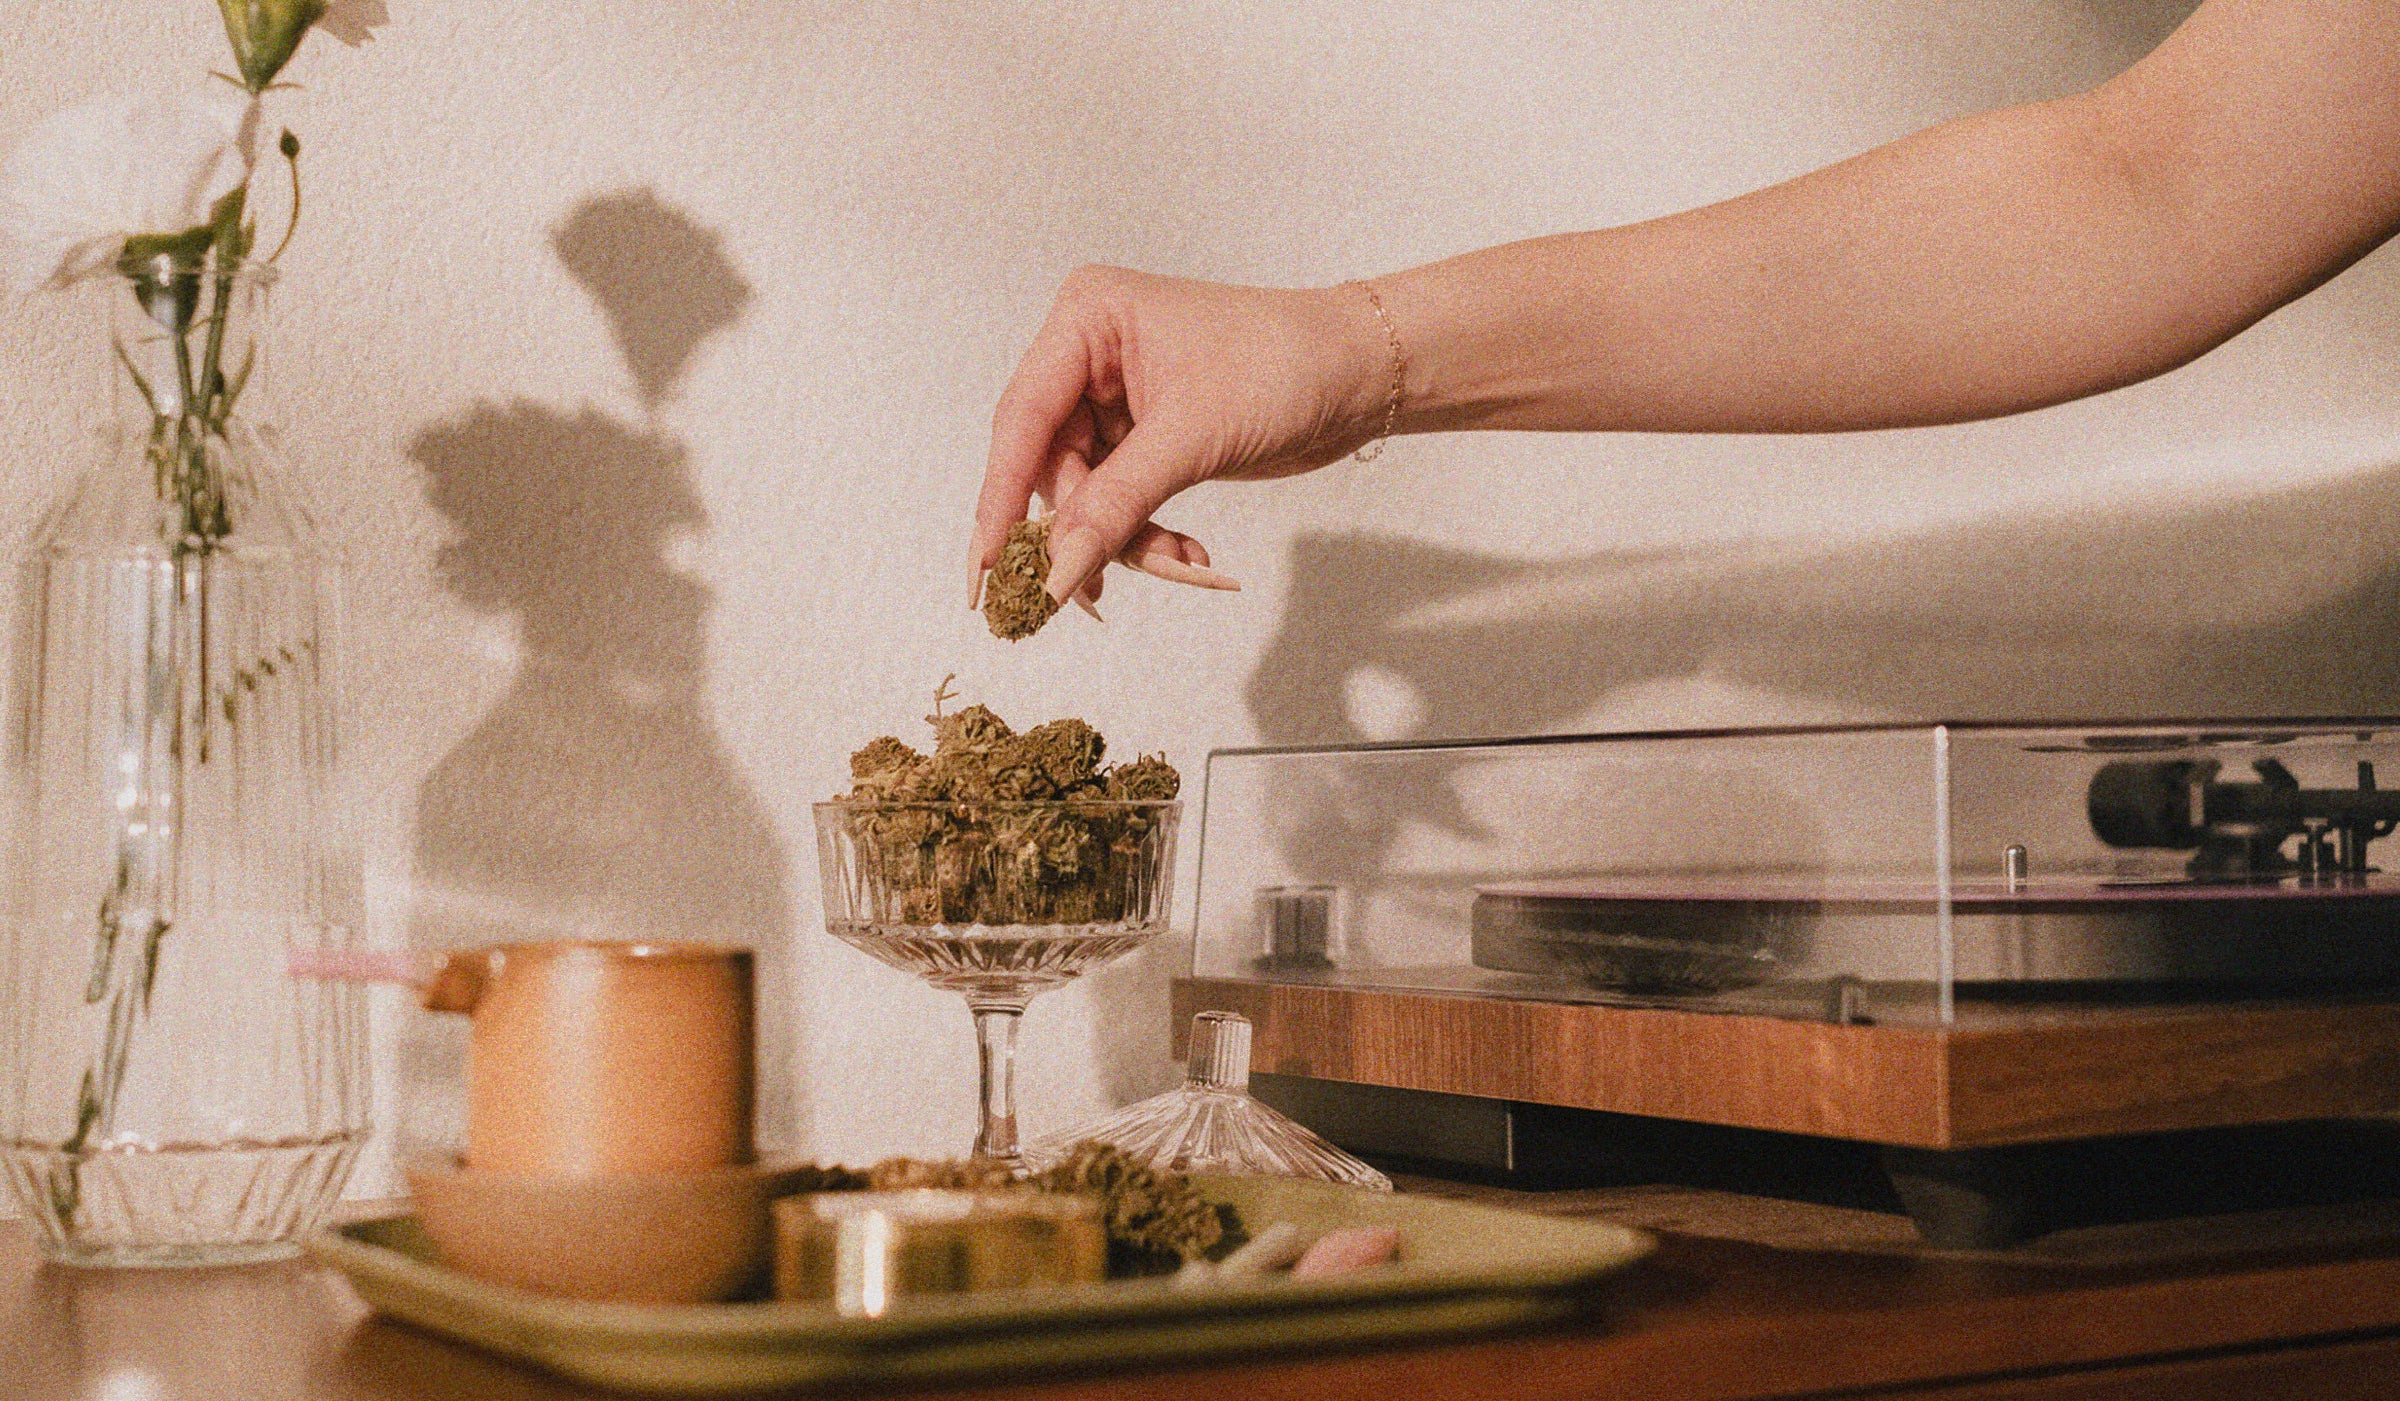 Harvesting tranquility: A woman's hand delicately picking a cannabis bud from an exquisite crystal cup in a cozy mid-century modern room adorned with a jar of flowers and a vintage vinyl record player.